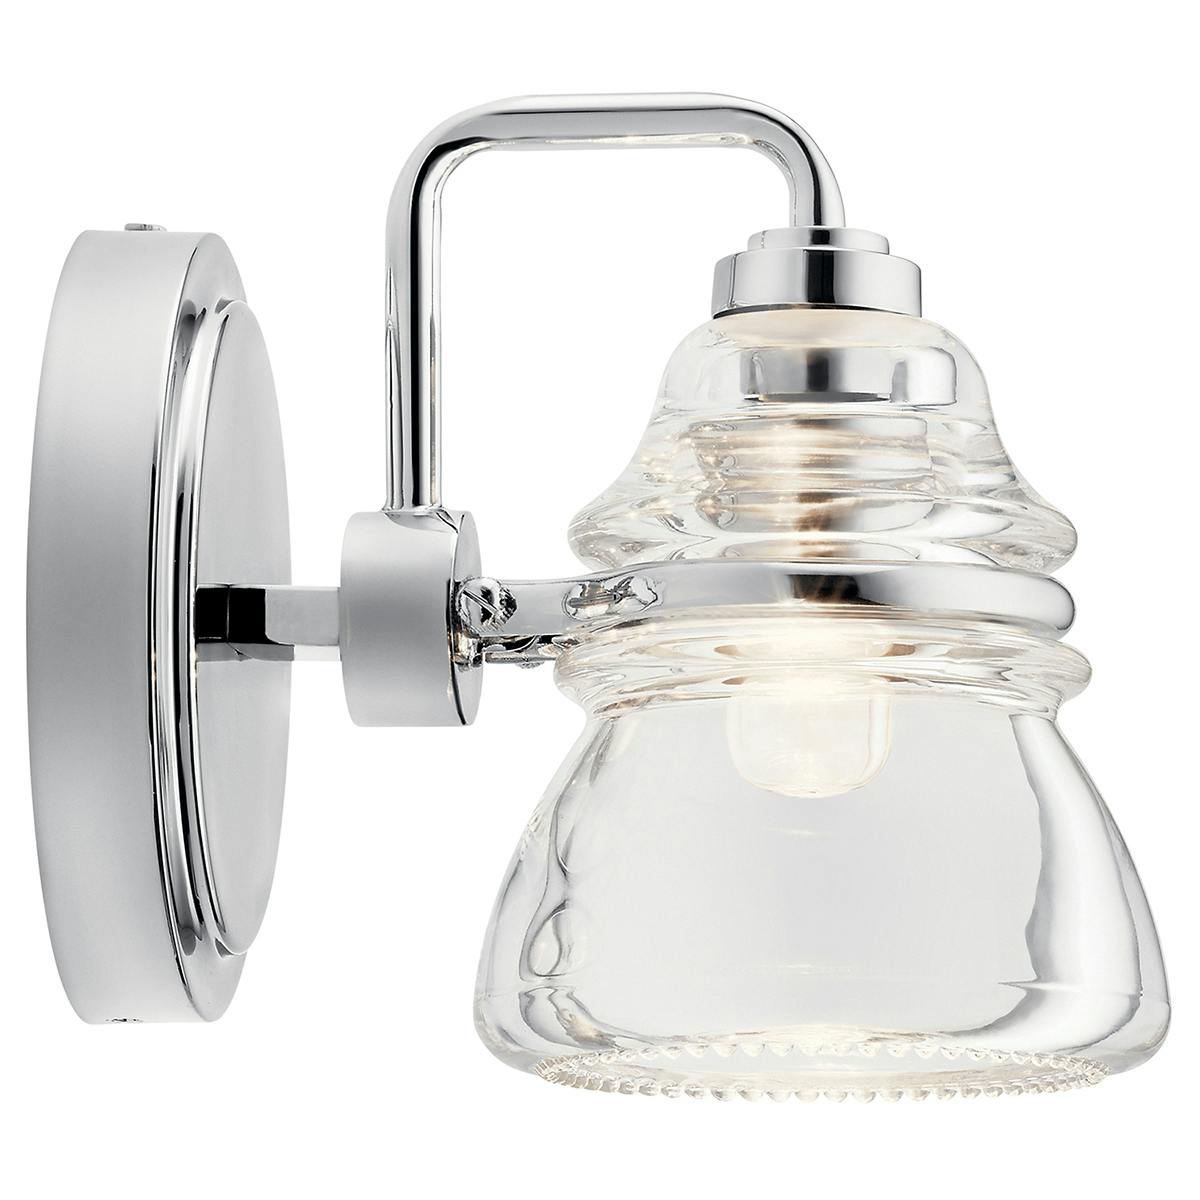 Profile view of the Talland 1 Light Wall Sconce Chrome on a white background